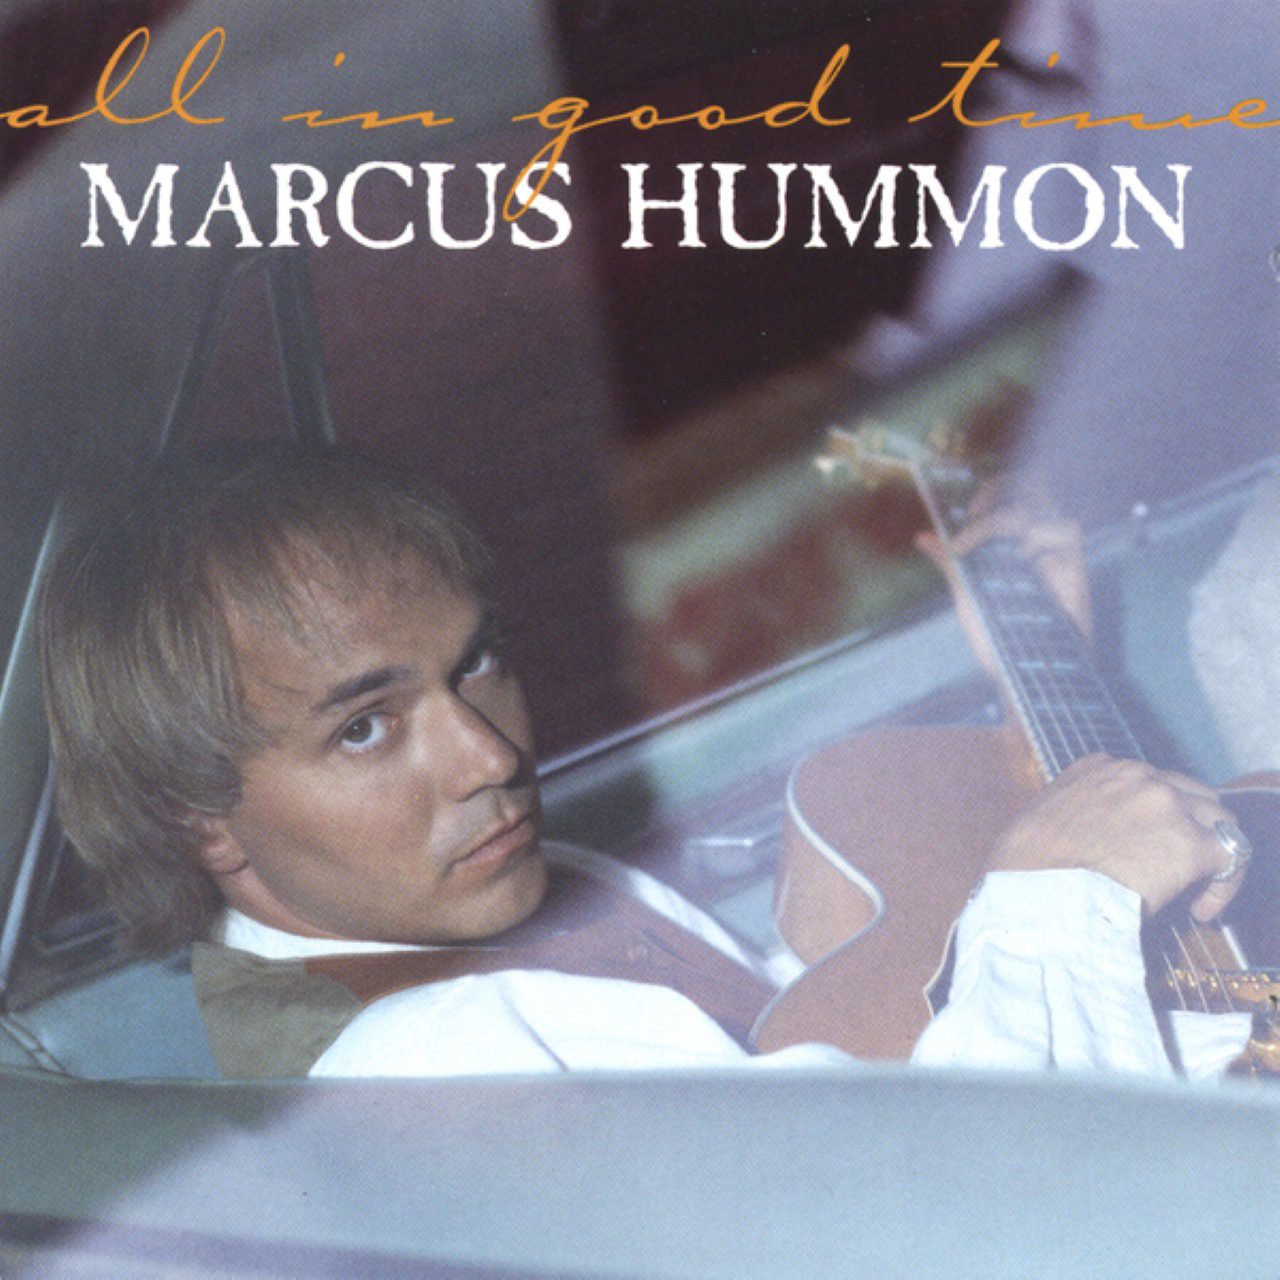 Marcus Hummon – All In Good Time cover album